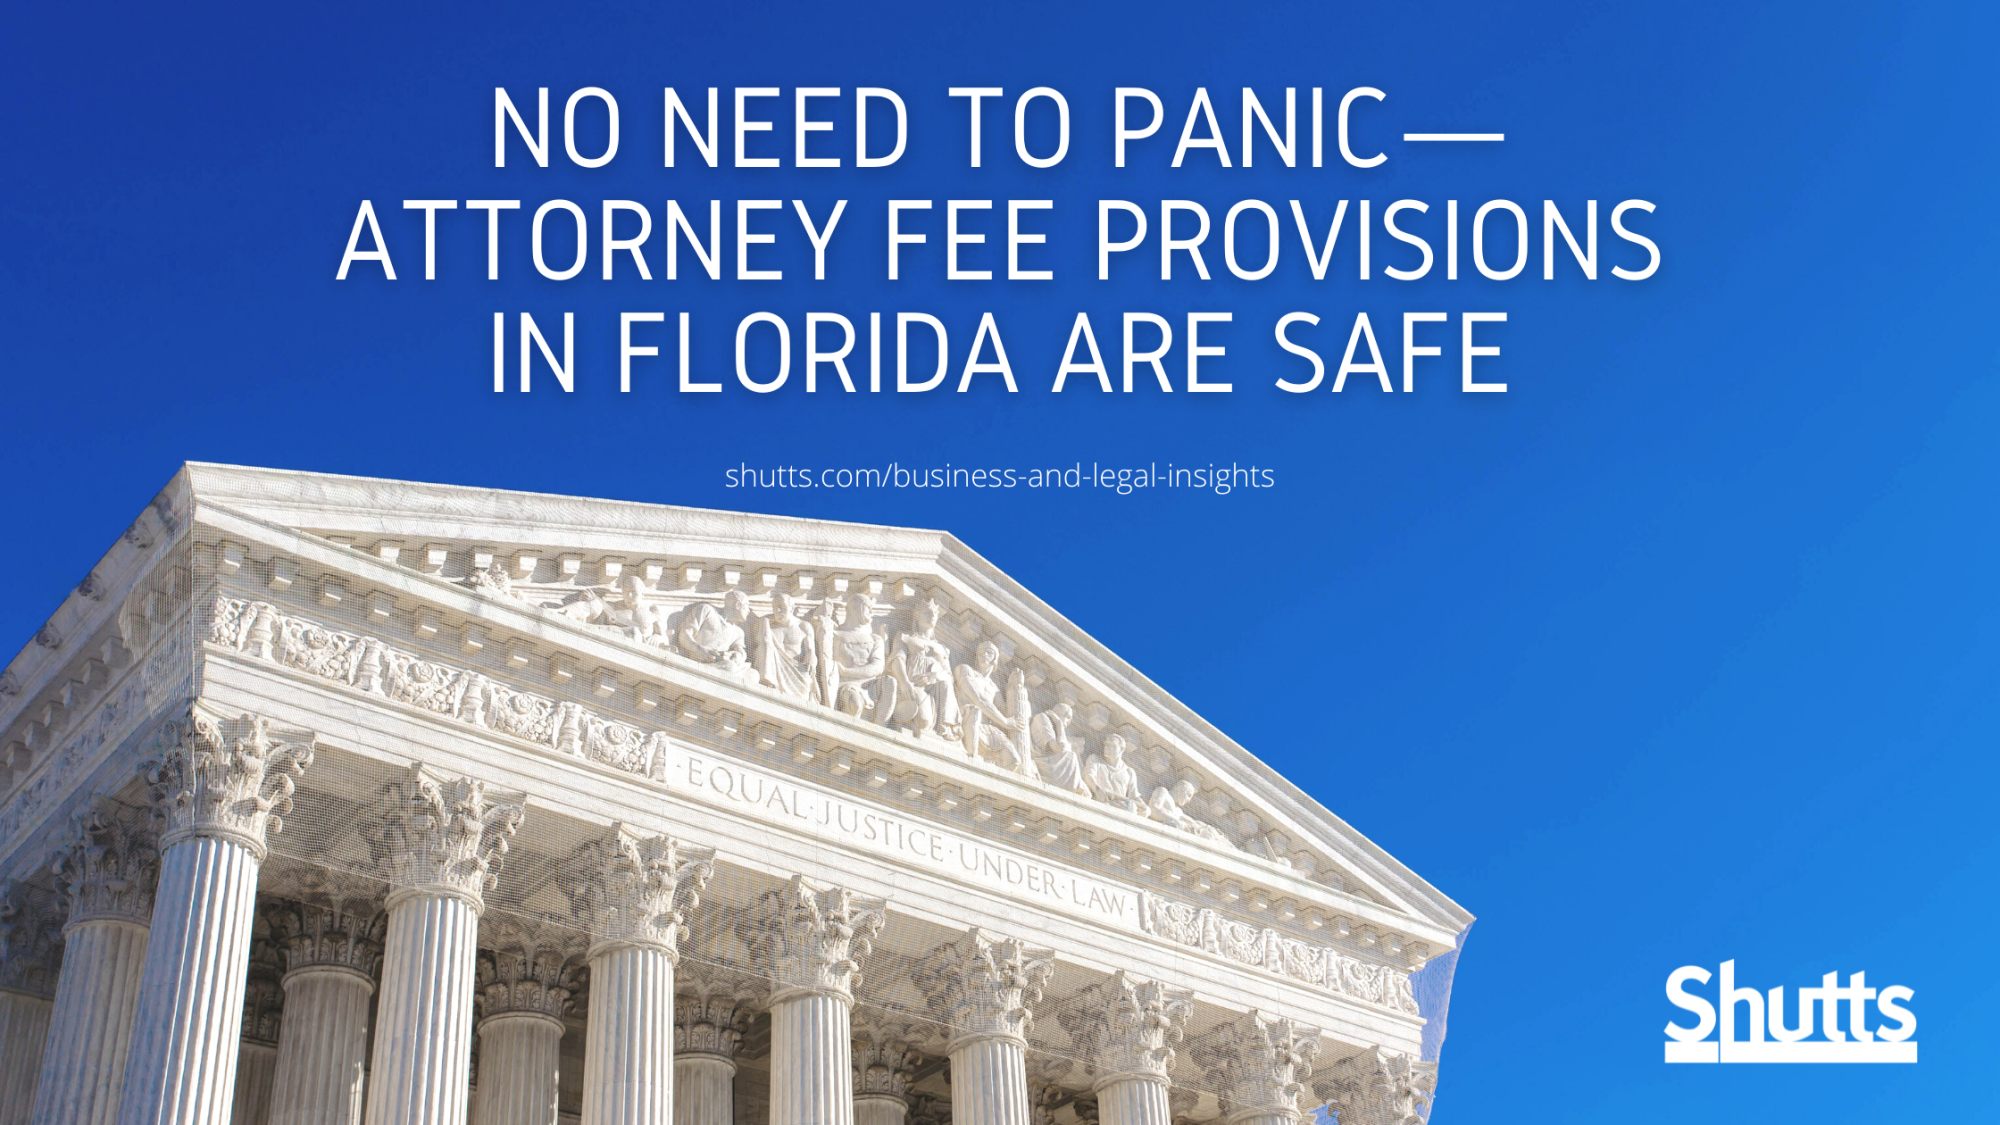 No Need to Panic—Attorney Fee Provisions in Florida Are Safe